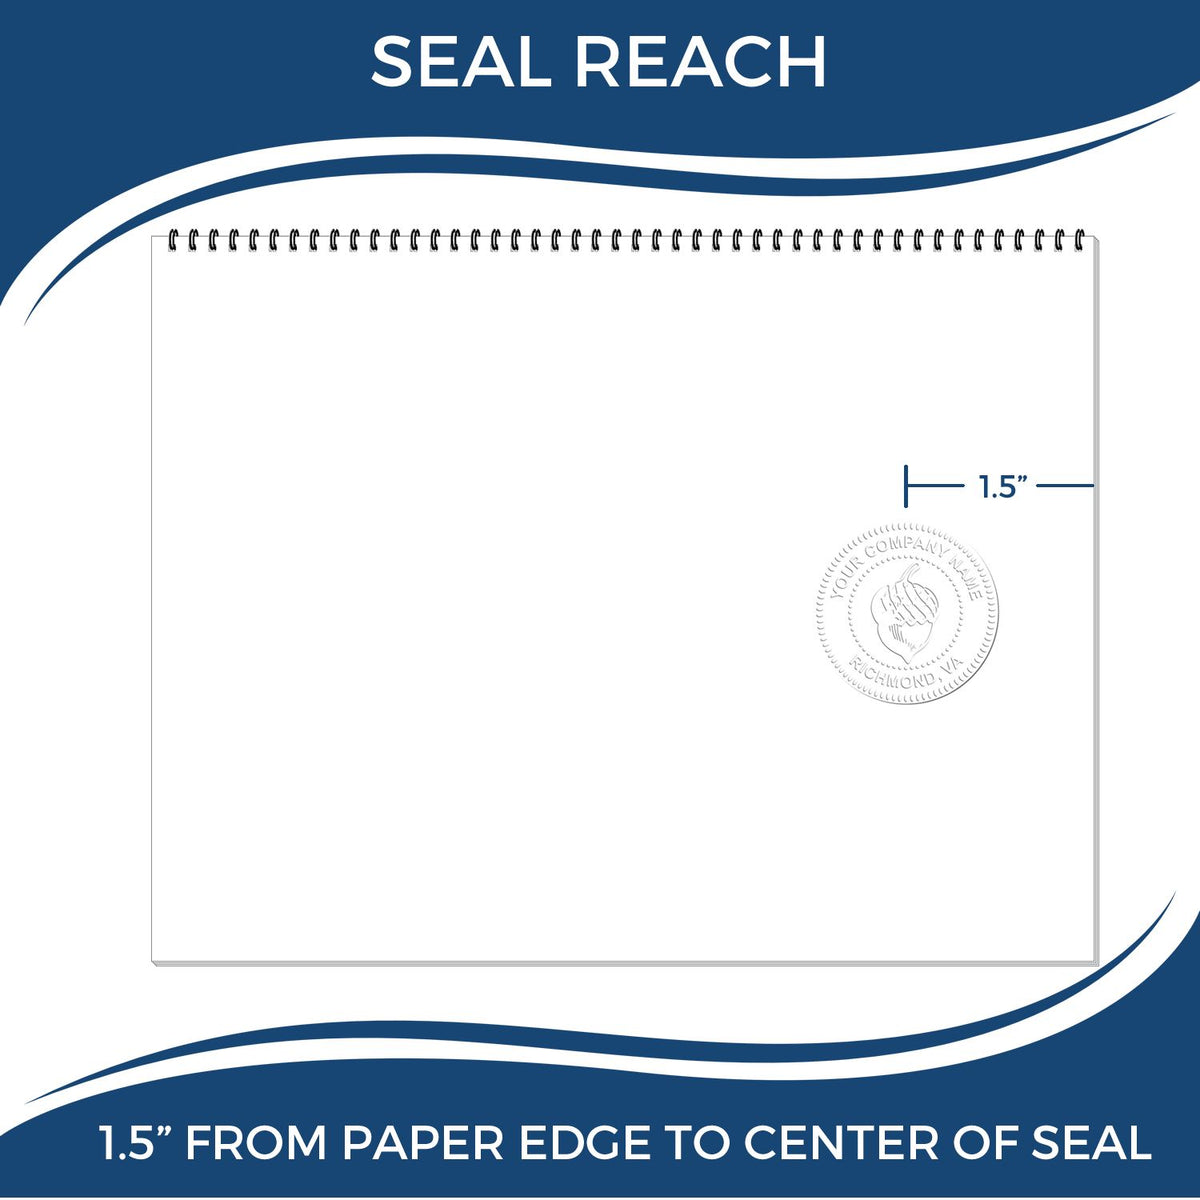 An infographic showing the seal reach which is represented by a ruler and a miniature seal image of the Gift Wyoming Architect Seal